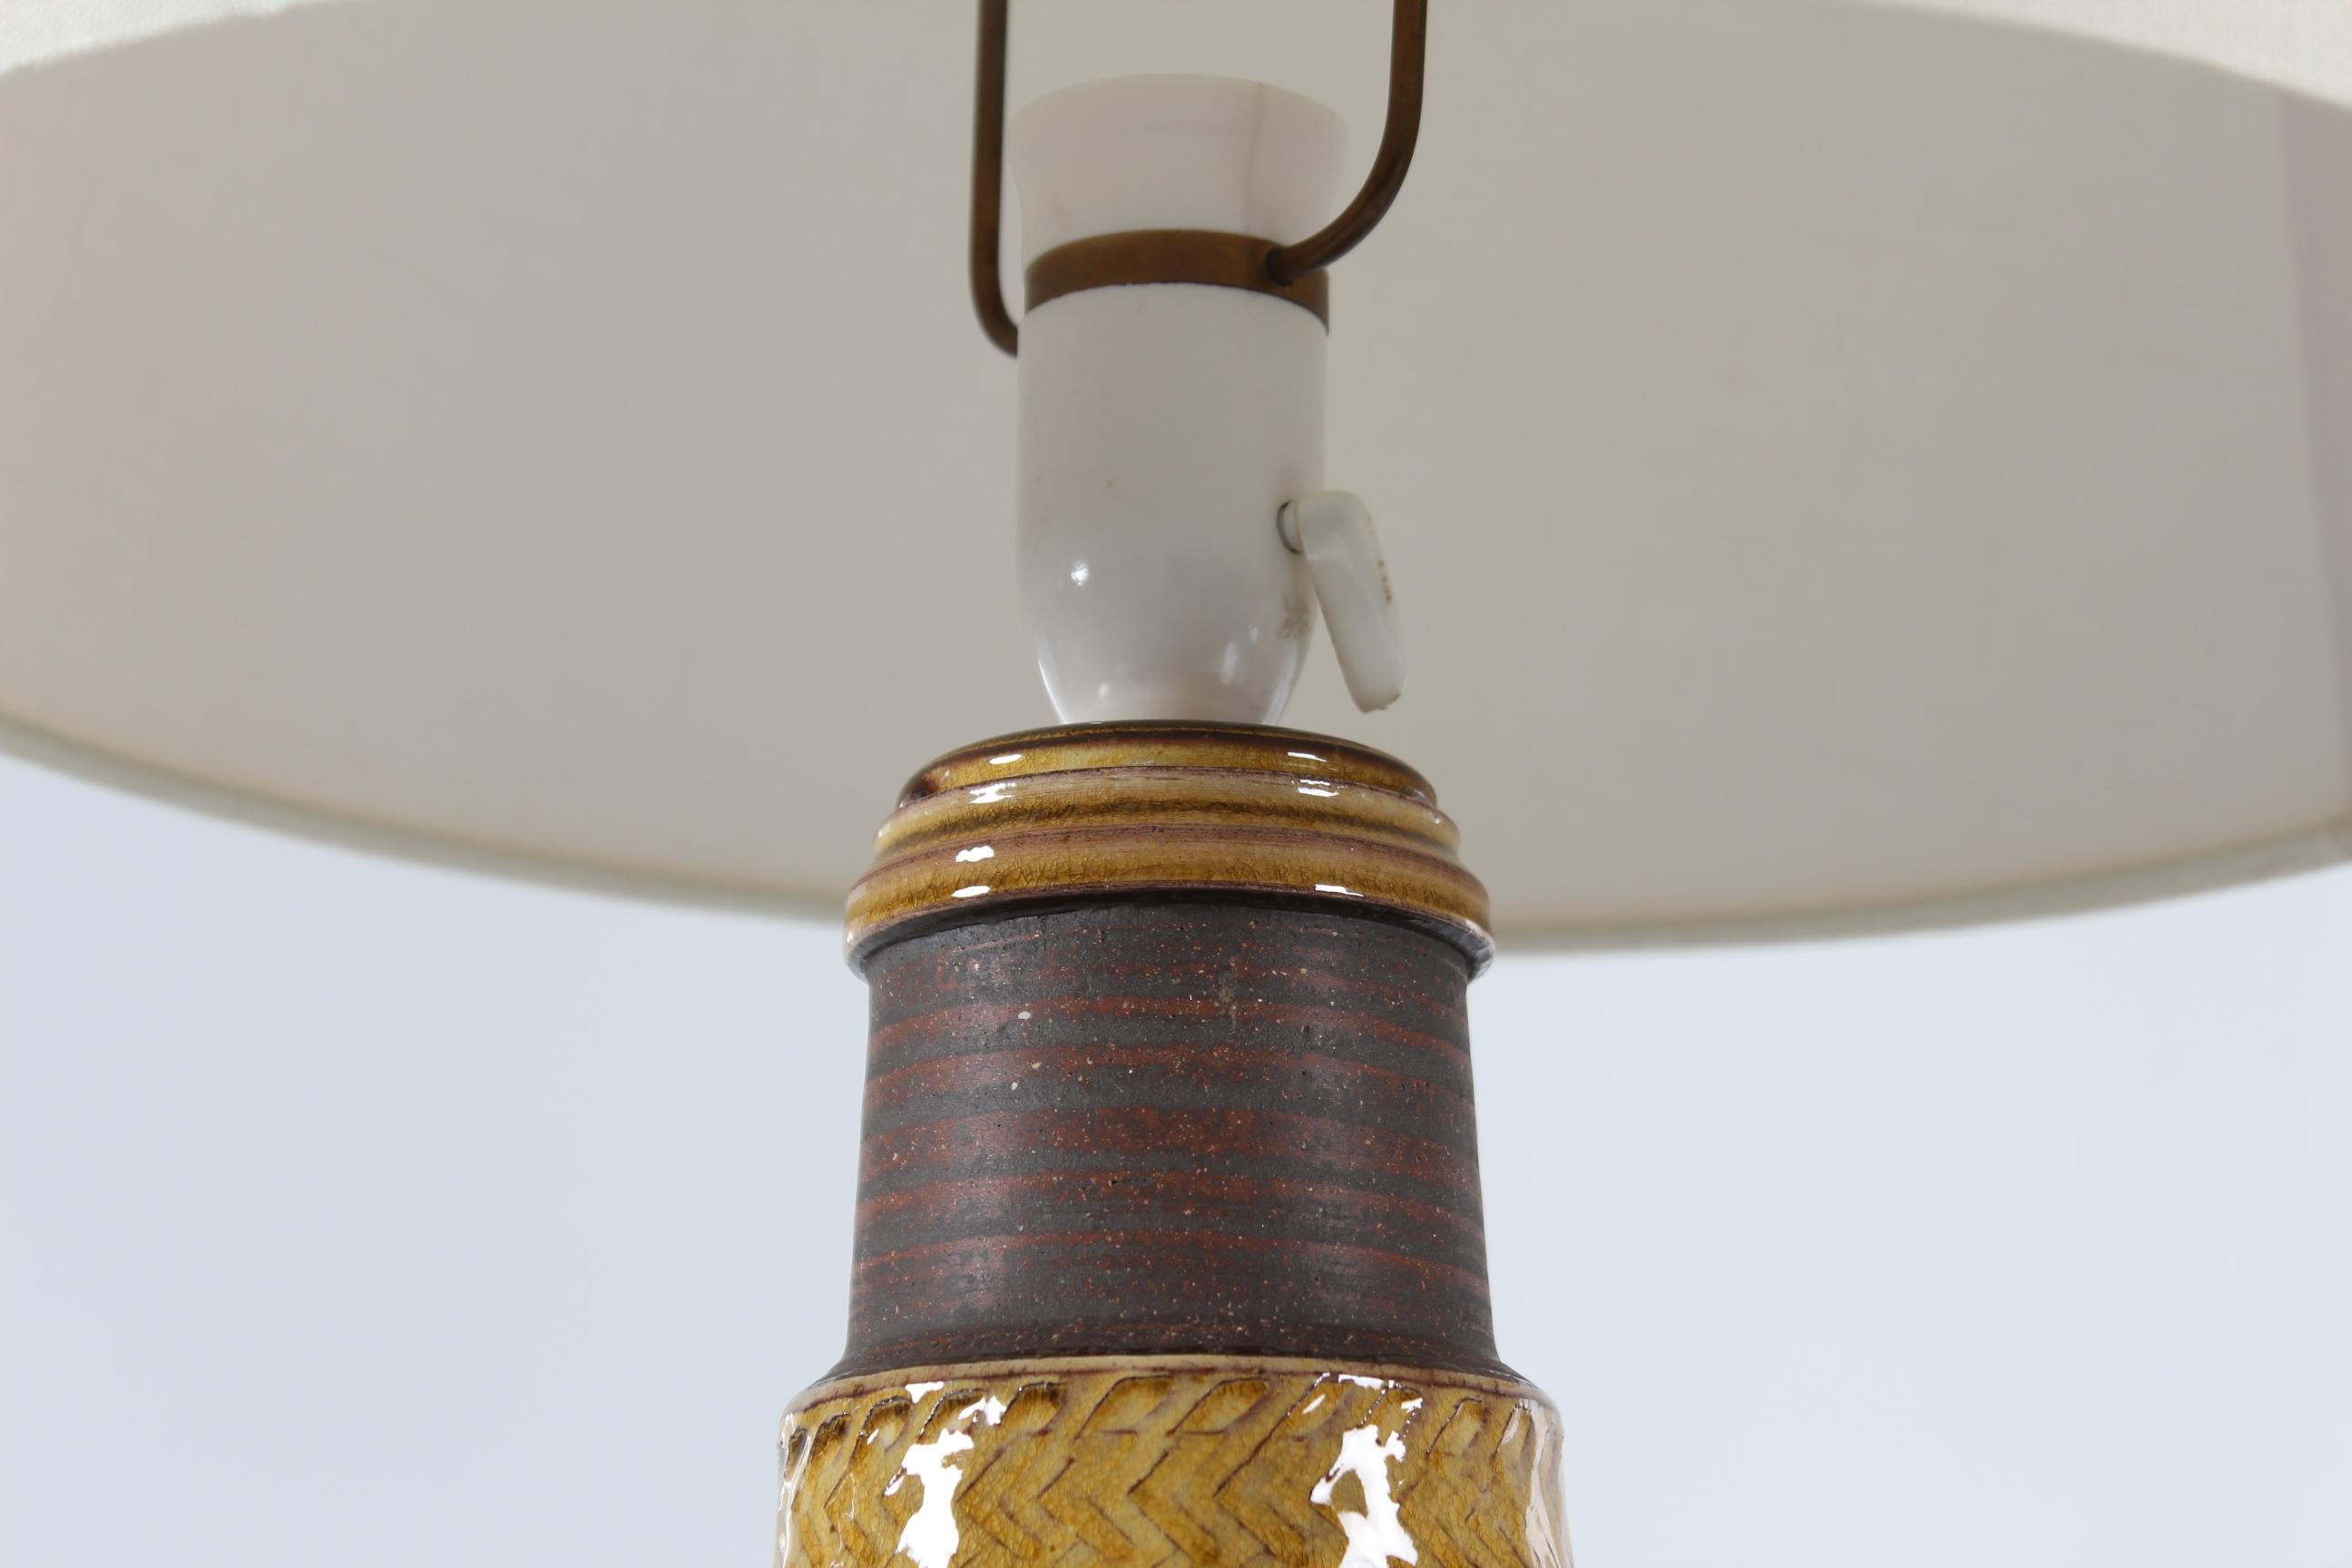 Mid-Century Modern Pair of Kähler Ceramic Table Lamps with Amber-Colored Glaze Denmark Midcentury